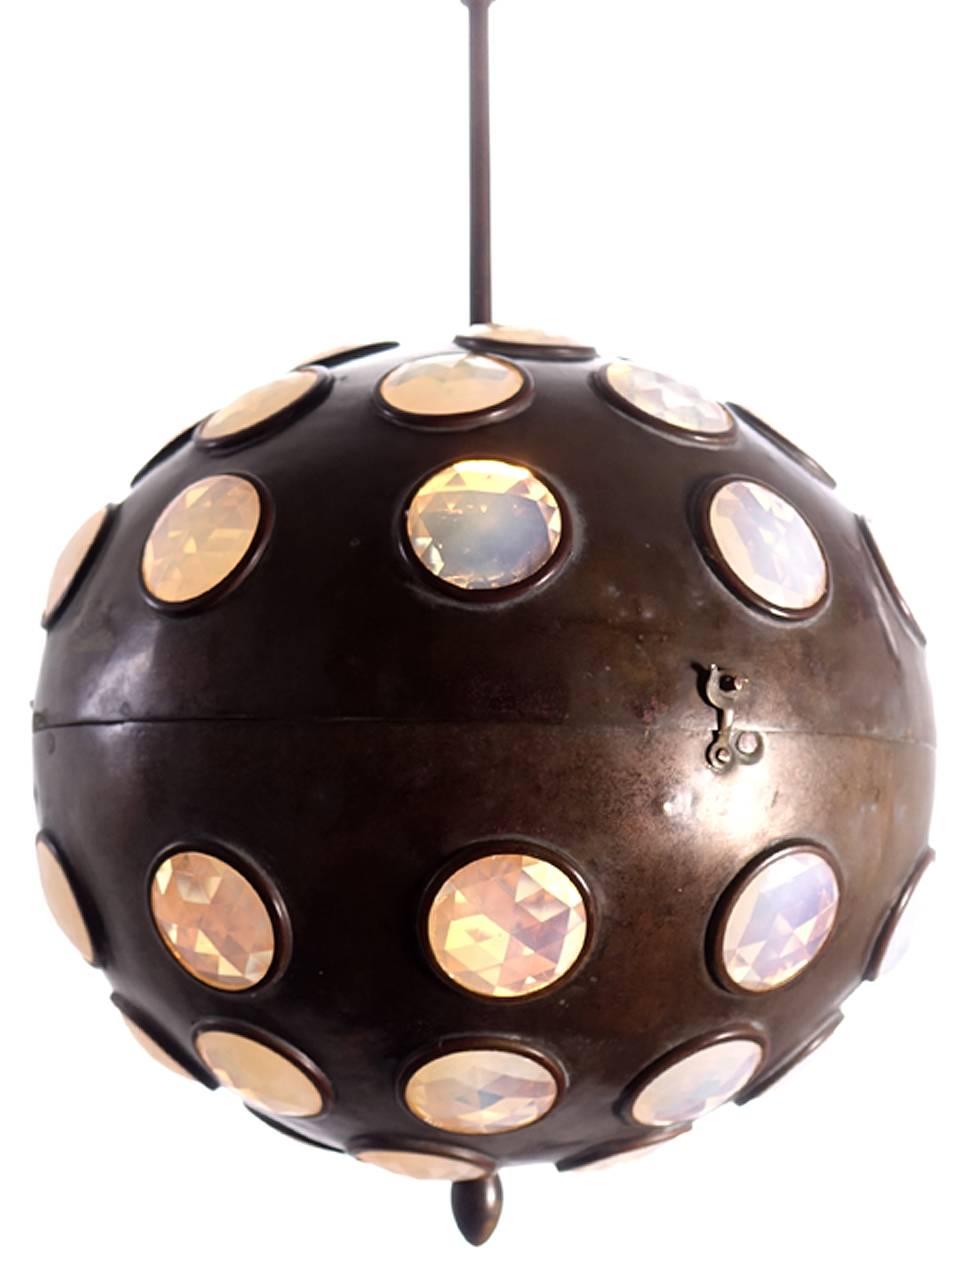 We have never seen another example like this. The brass globe is a foot in diameter and contains about 50 jeweled inserts. The globe is hinged and splits open to change the bulb.